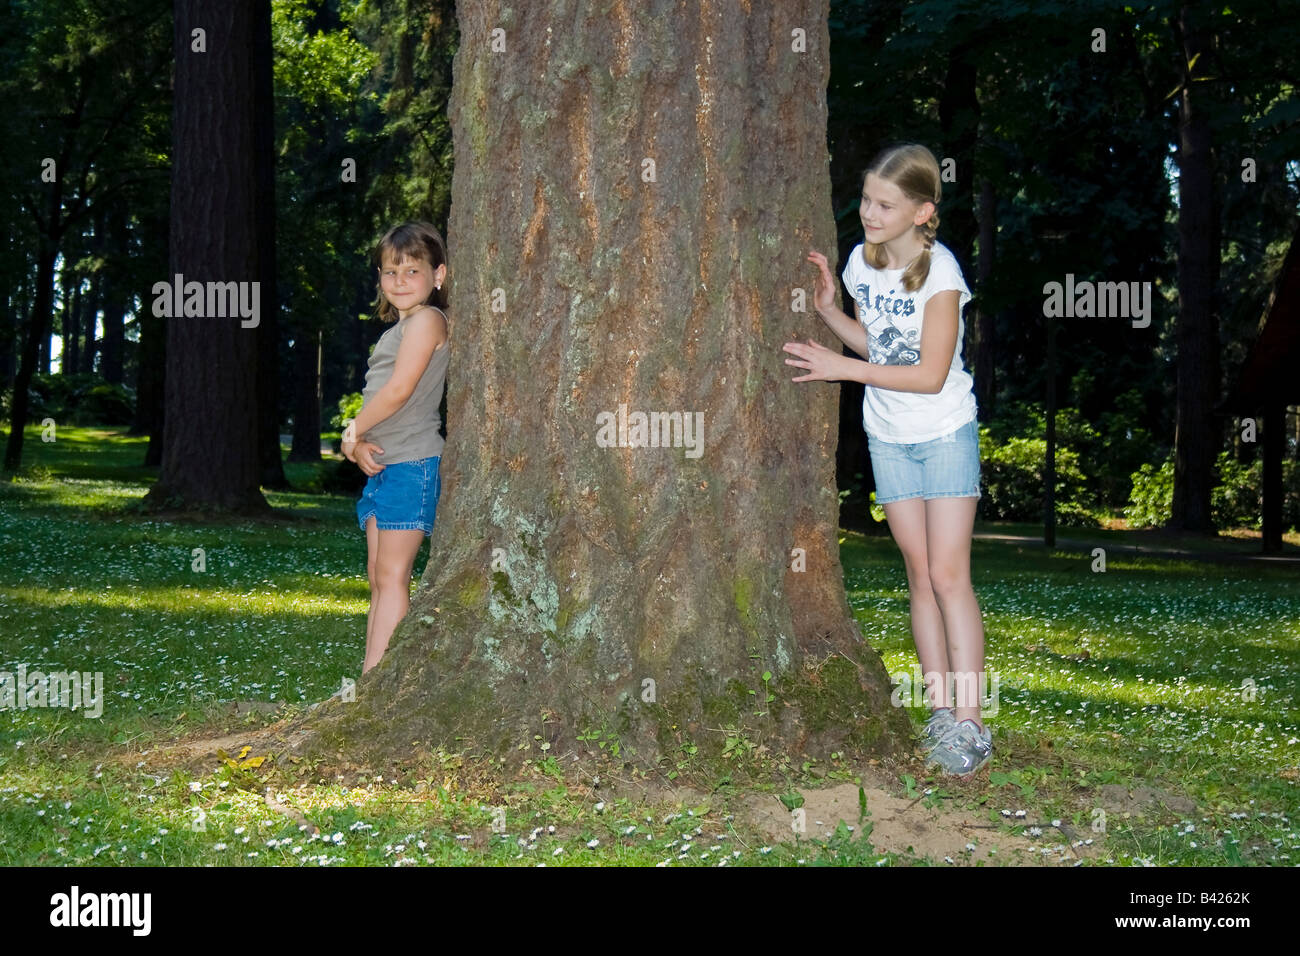 Two young girls playing hide and seek in a forest area Stock Photo